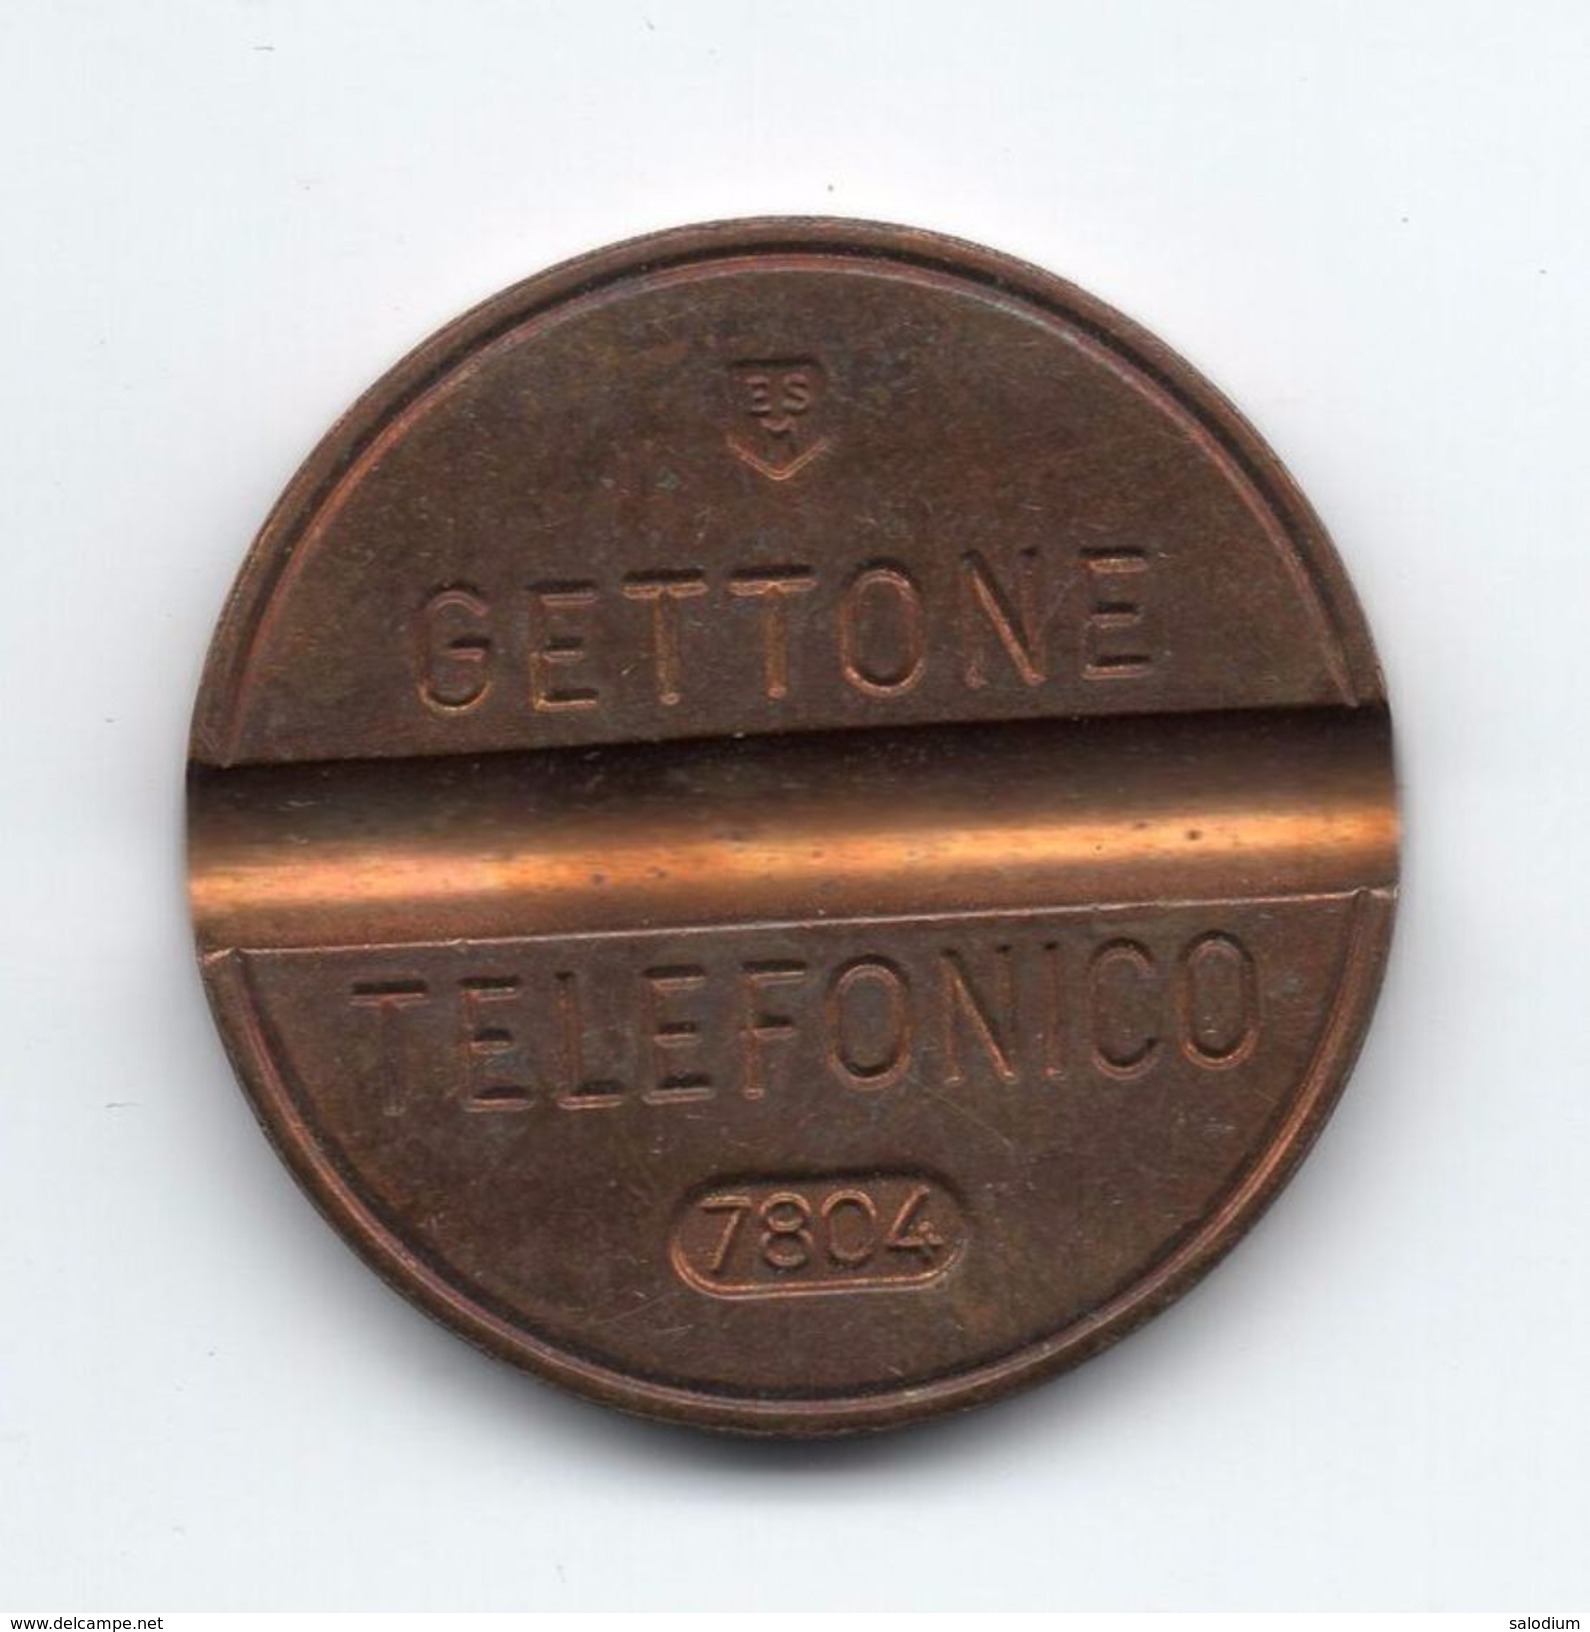 Gettone Telefonico 7804 Token Telephone - (Id-769) - Professionals/Firms